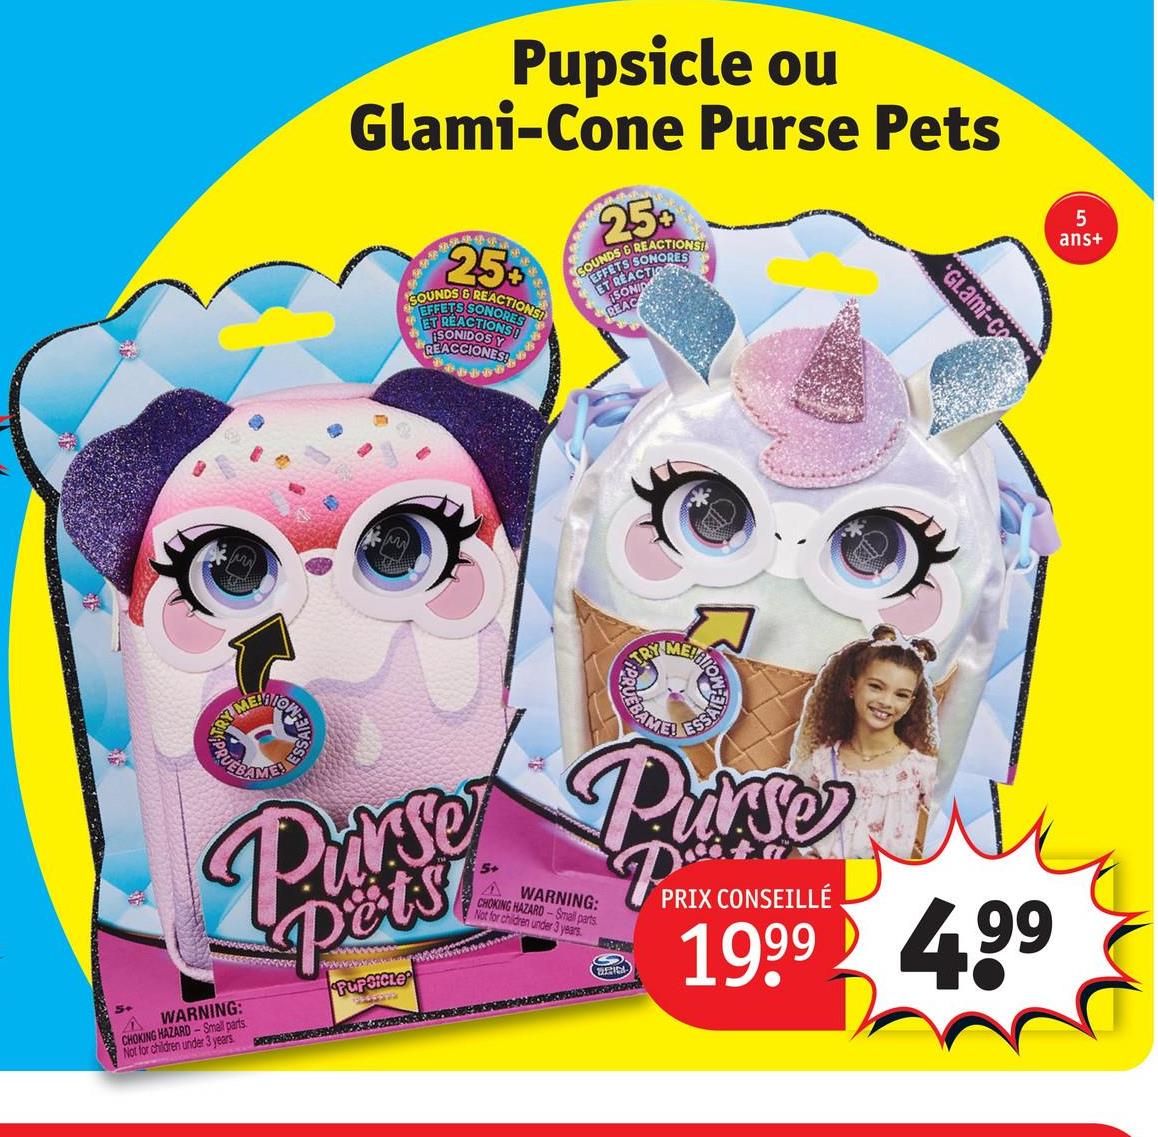 TRY MENTION
PRUEB
ESS
Pupsicle ou
Glami-Cone Purse Pets
25%
SOUNDS & REACTIONS!
EFFETS SONORES
APET REACTIONS!
SONIDOS Y
REACCIONES
250
SOUNDS & REACTIONS!
EFFETS SONORES
CTIO
ET REACT
SONID
REAC
'GLami-Co
Purse Purse
WARNING:
CHOKING HAZARD-Small parts
Not for children under 3 years
Pets
PUPSICLE
3545372
A
WARNING:
CHOKING HAZARD-Small parts
Not for children under 3 years
BRIDA
PPRIX C
PRIX CONSEILLÉ
1999 499
5
ans+